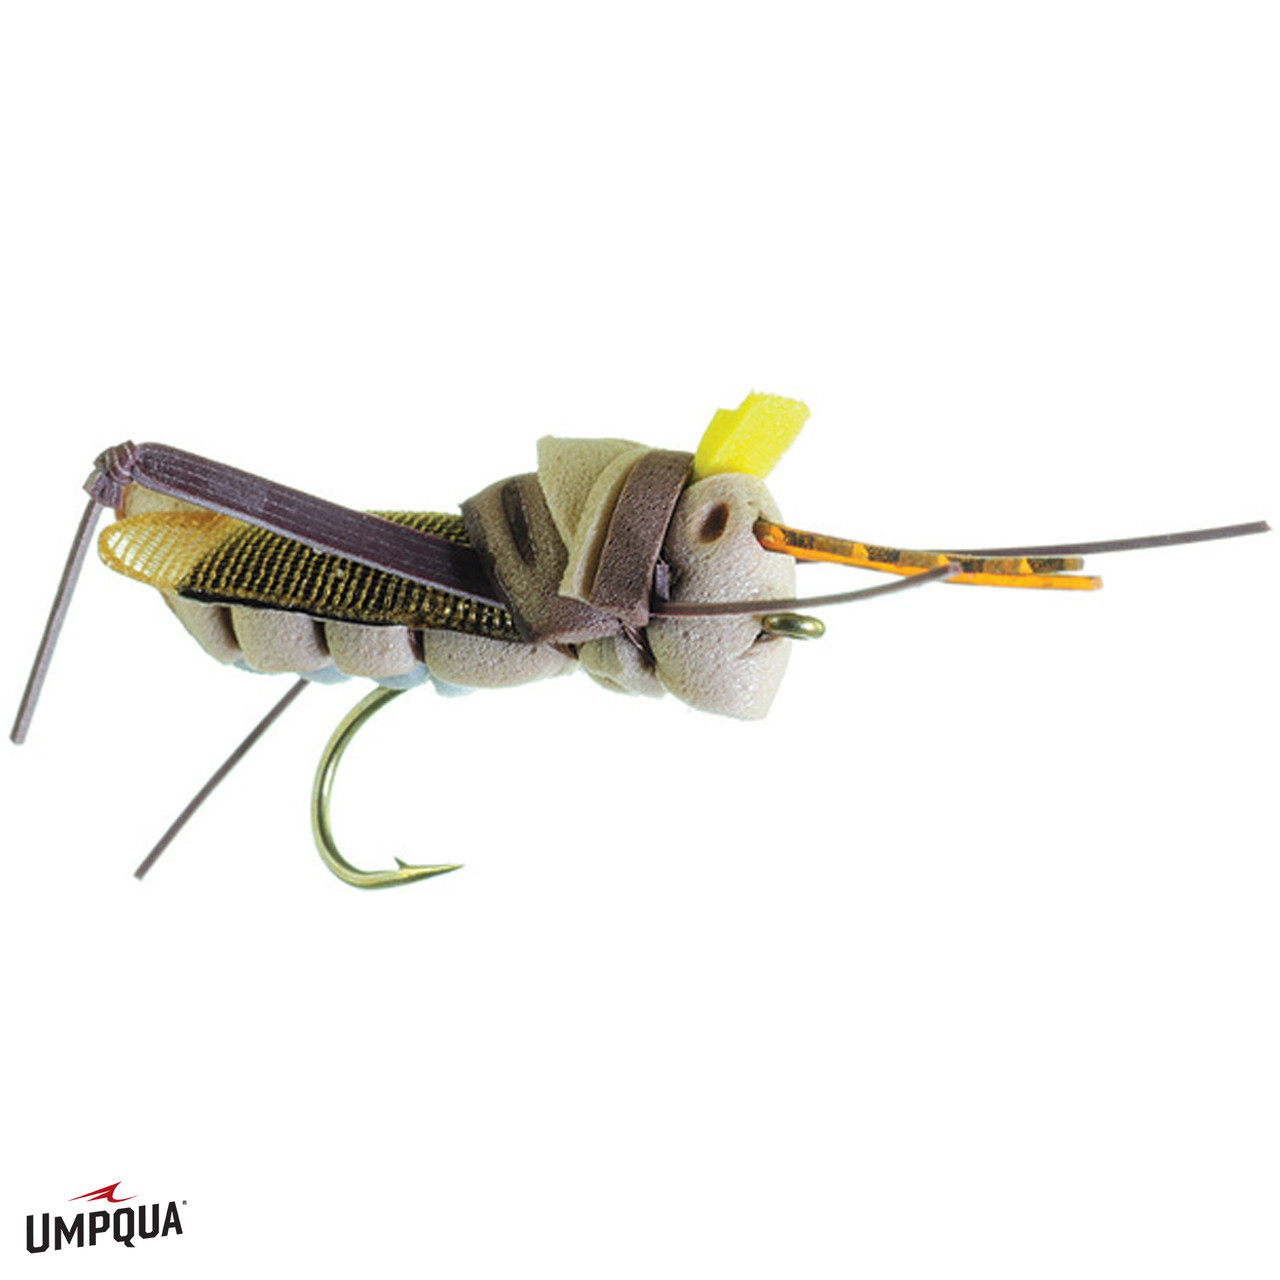 Schumman's Water Cricket makes fly fishing easy - Farm and Dairy